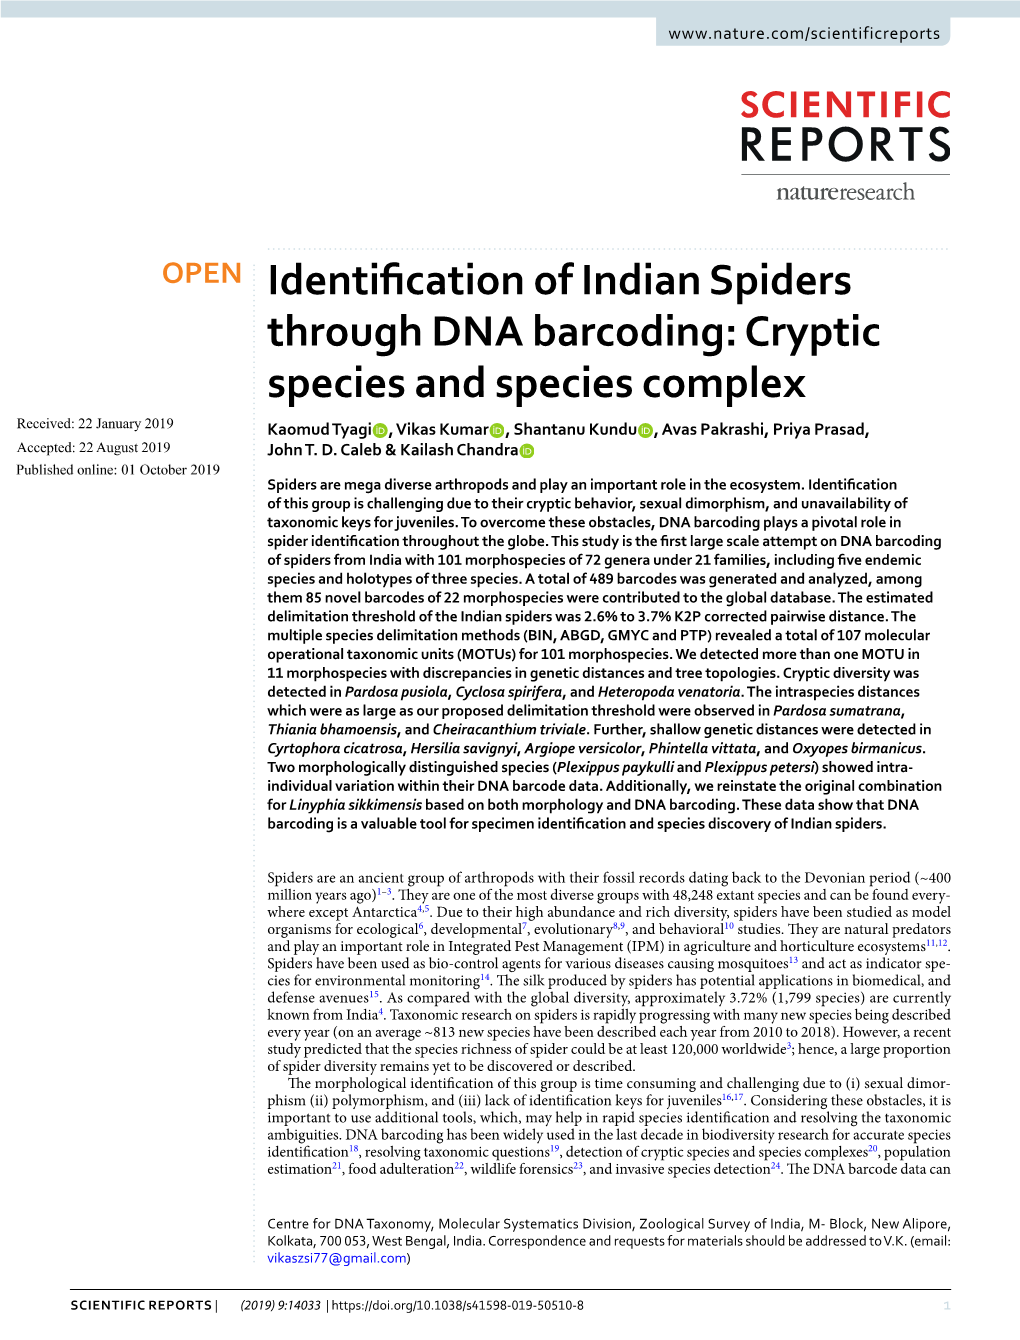 Identification of Indian Spiders Through DNA Barcoding